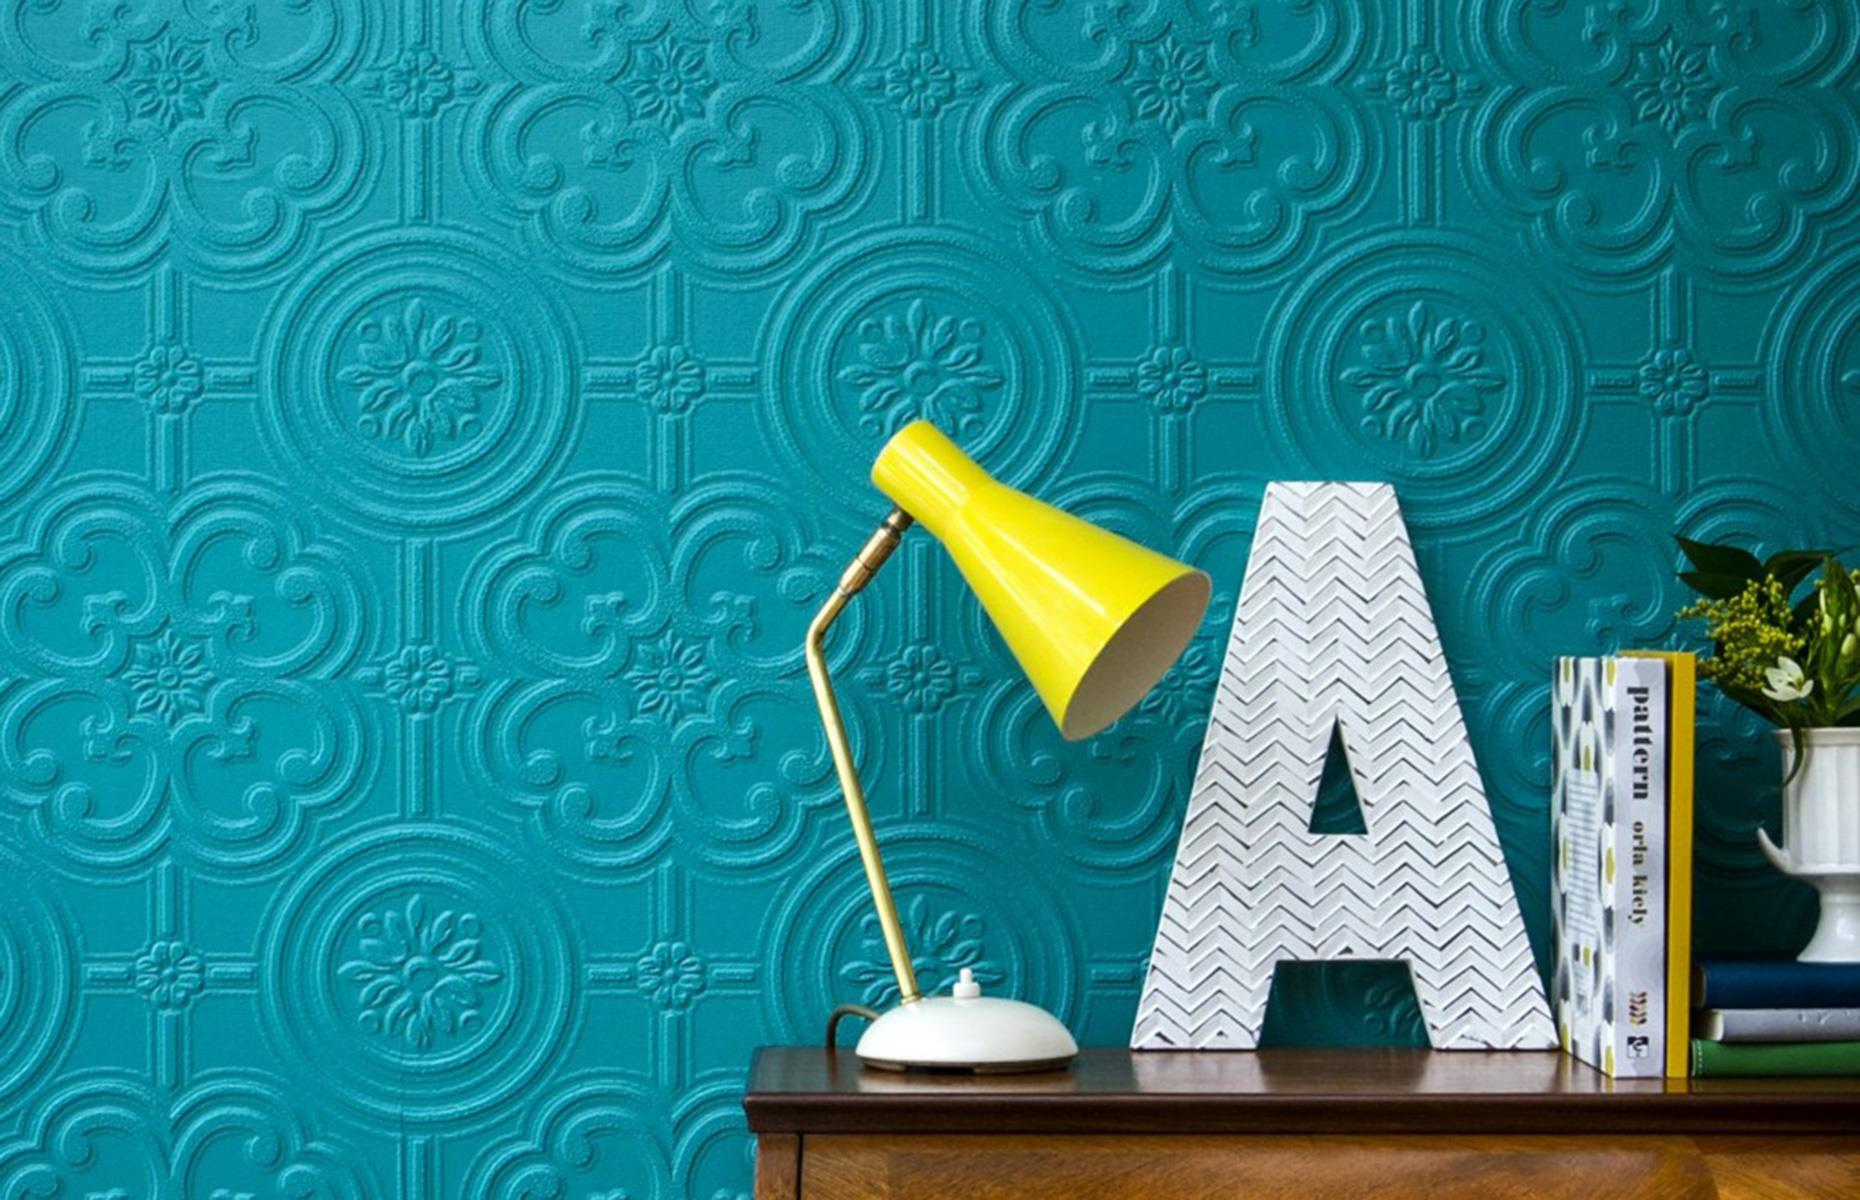 Teal Anaglypta wallpaper with a console table with a yellow lamp in front